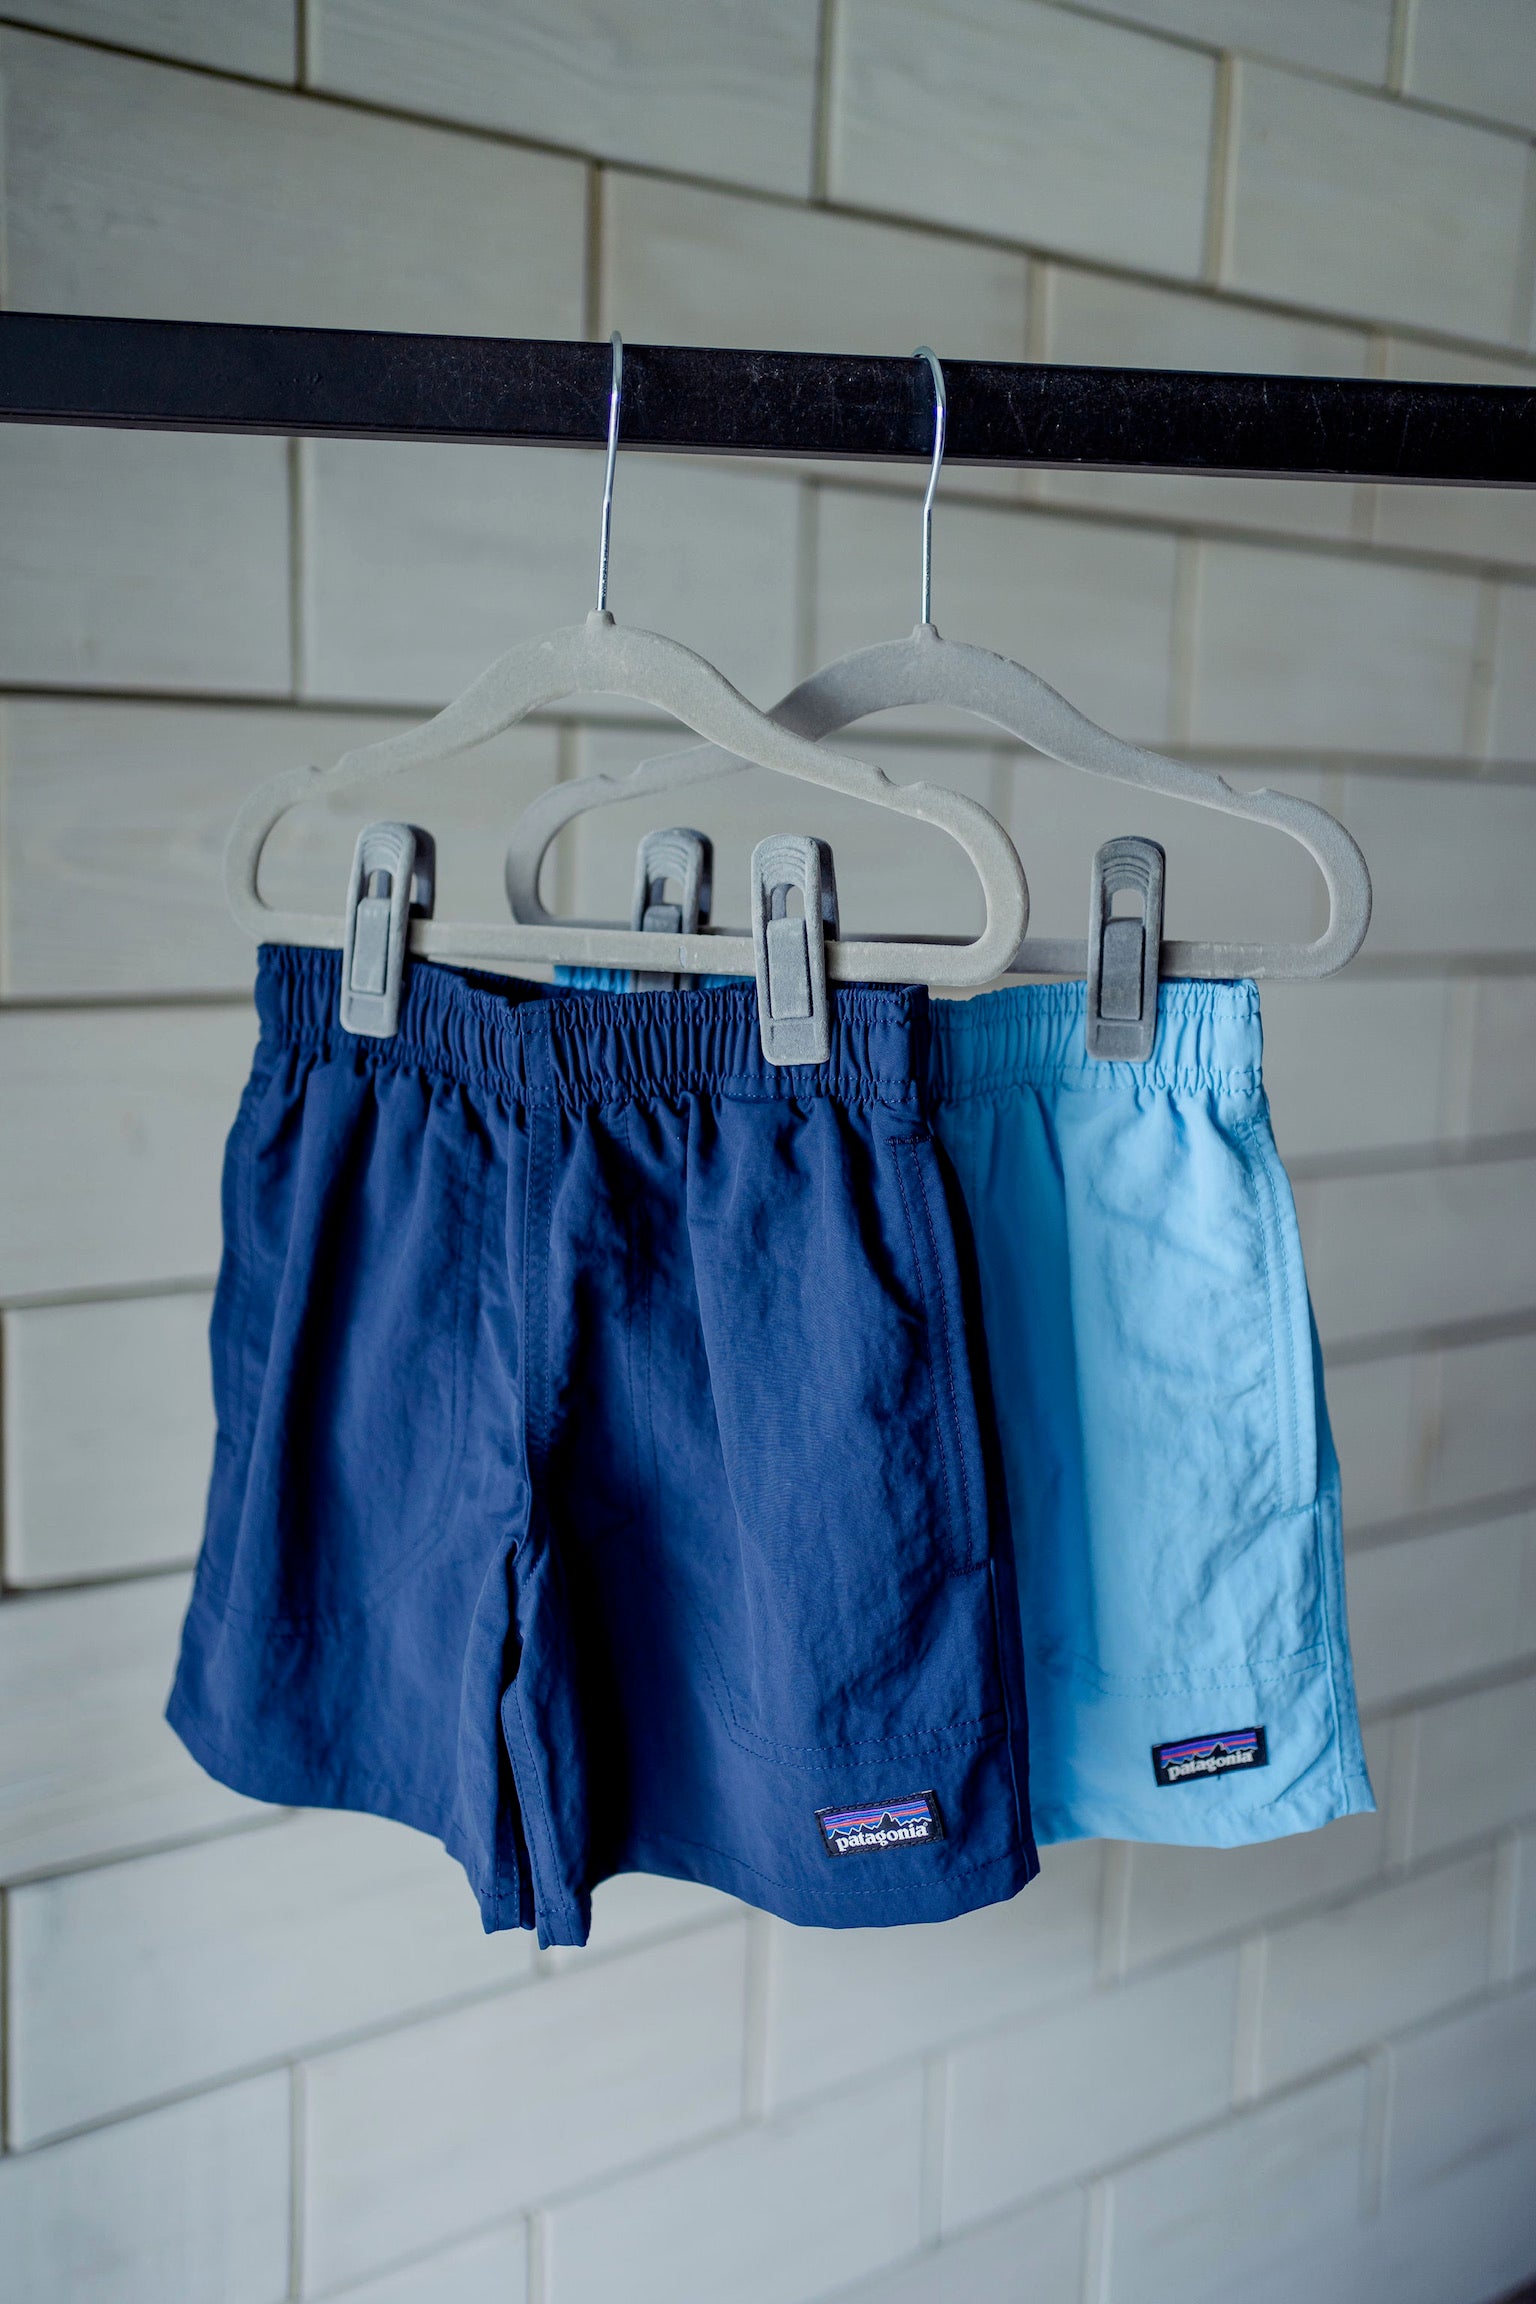 Why Are Patagonia Baggies the Best Shorts?